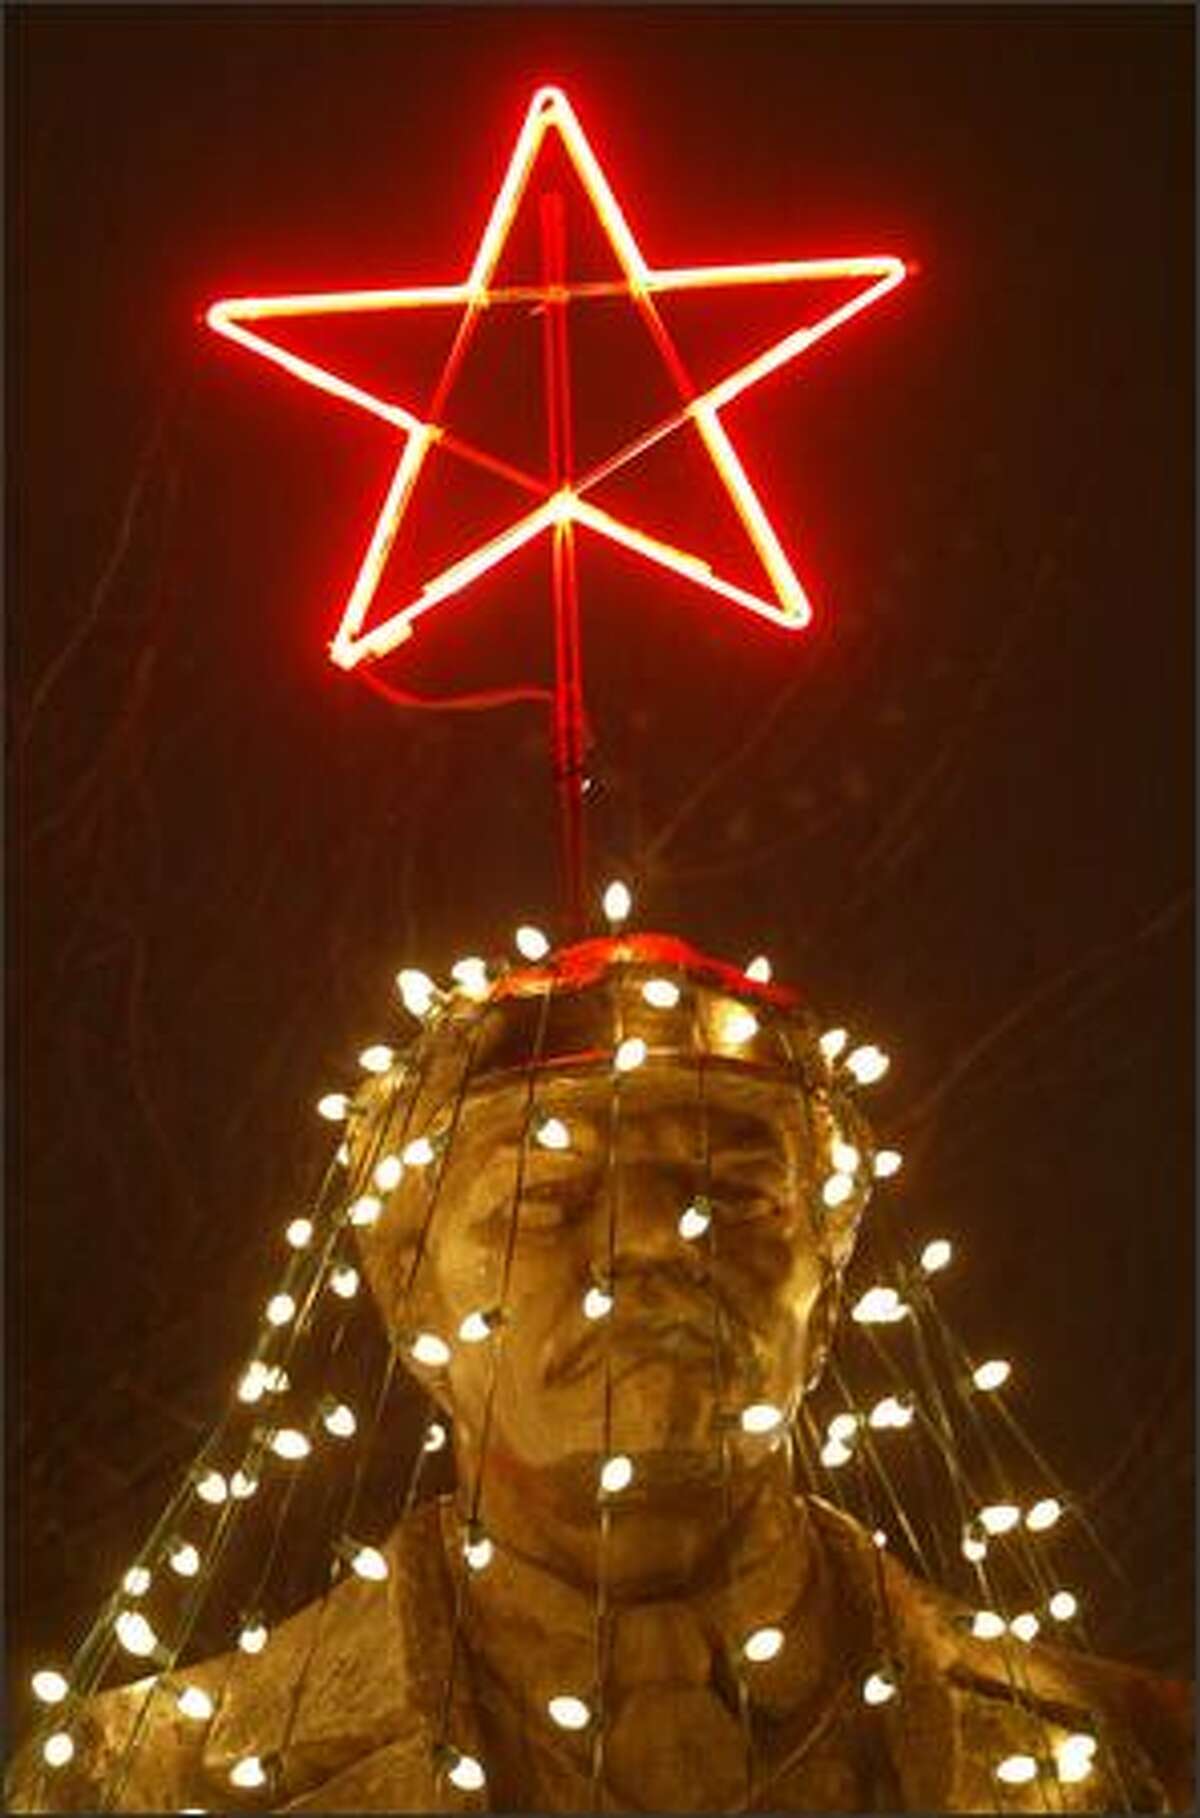 Folks in Fremont gathered last night for the lighting ceremony at the Lenin statue. Strings of light created a Christmas tree around the statue, complete with a shining red star on his hat.